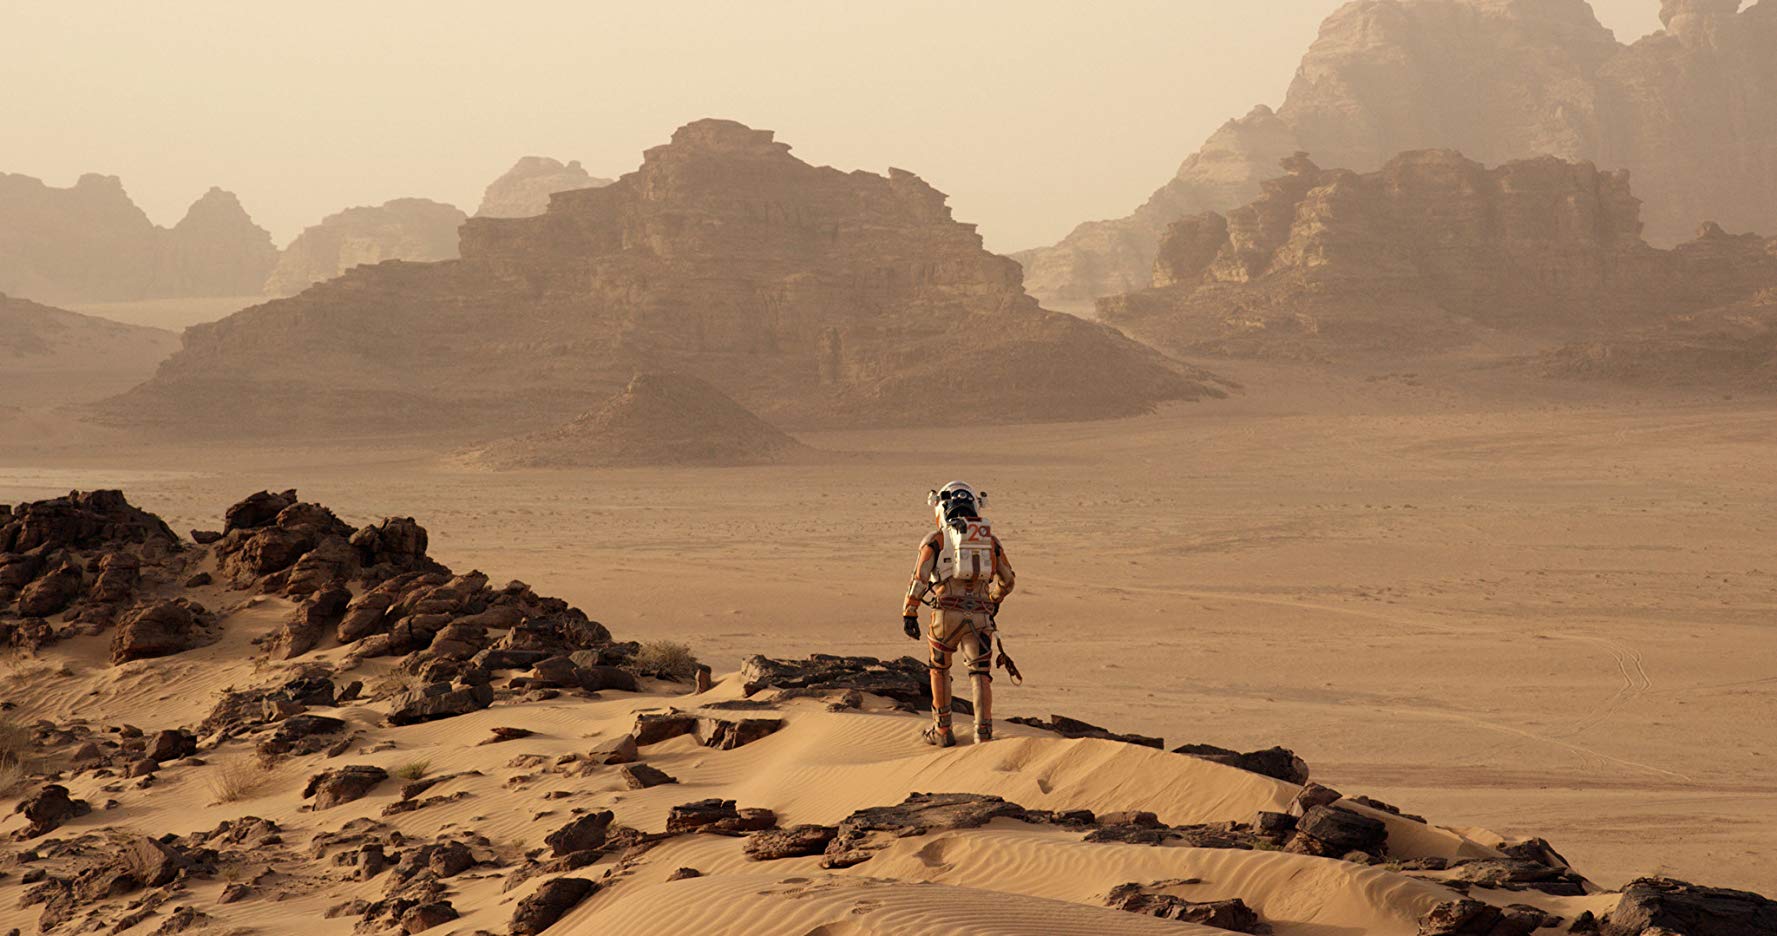 Matt Damon - the sole human being on the planet Mars in The Martian (2015)